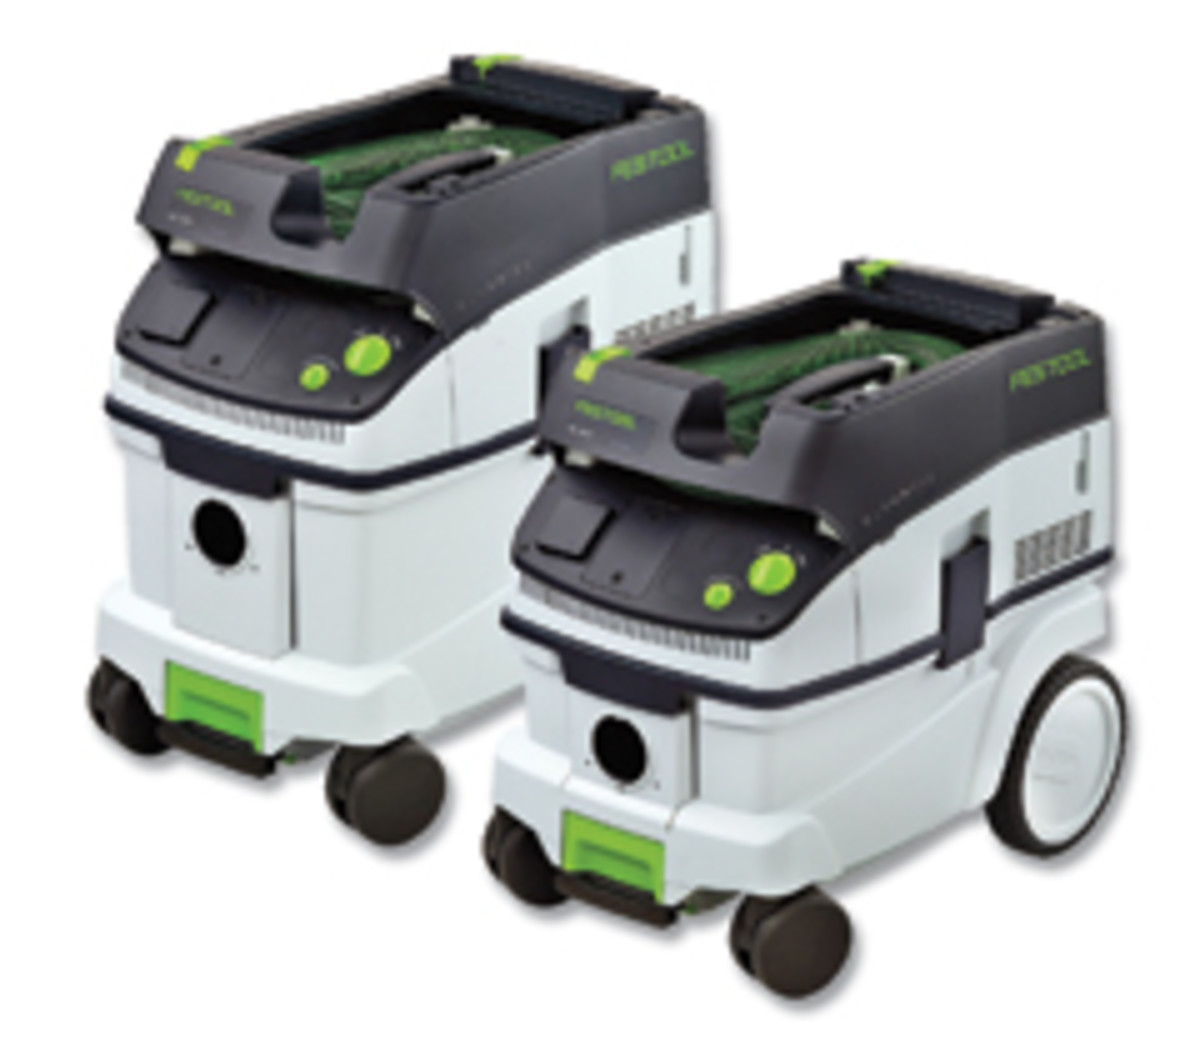 Festool has introduced two new dust extractors that feature the company's self-cleaning filter bags.